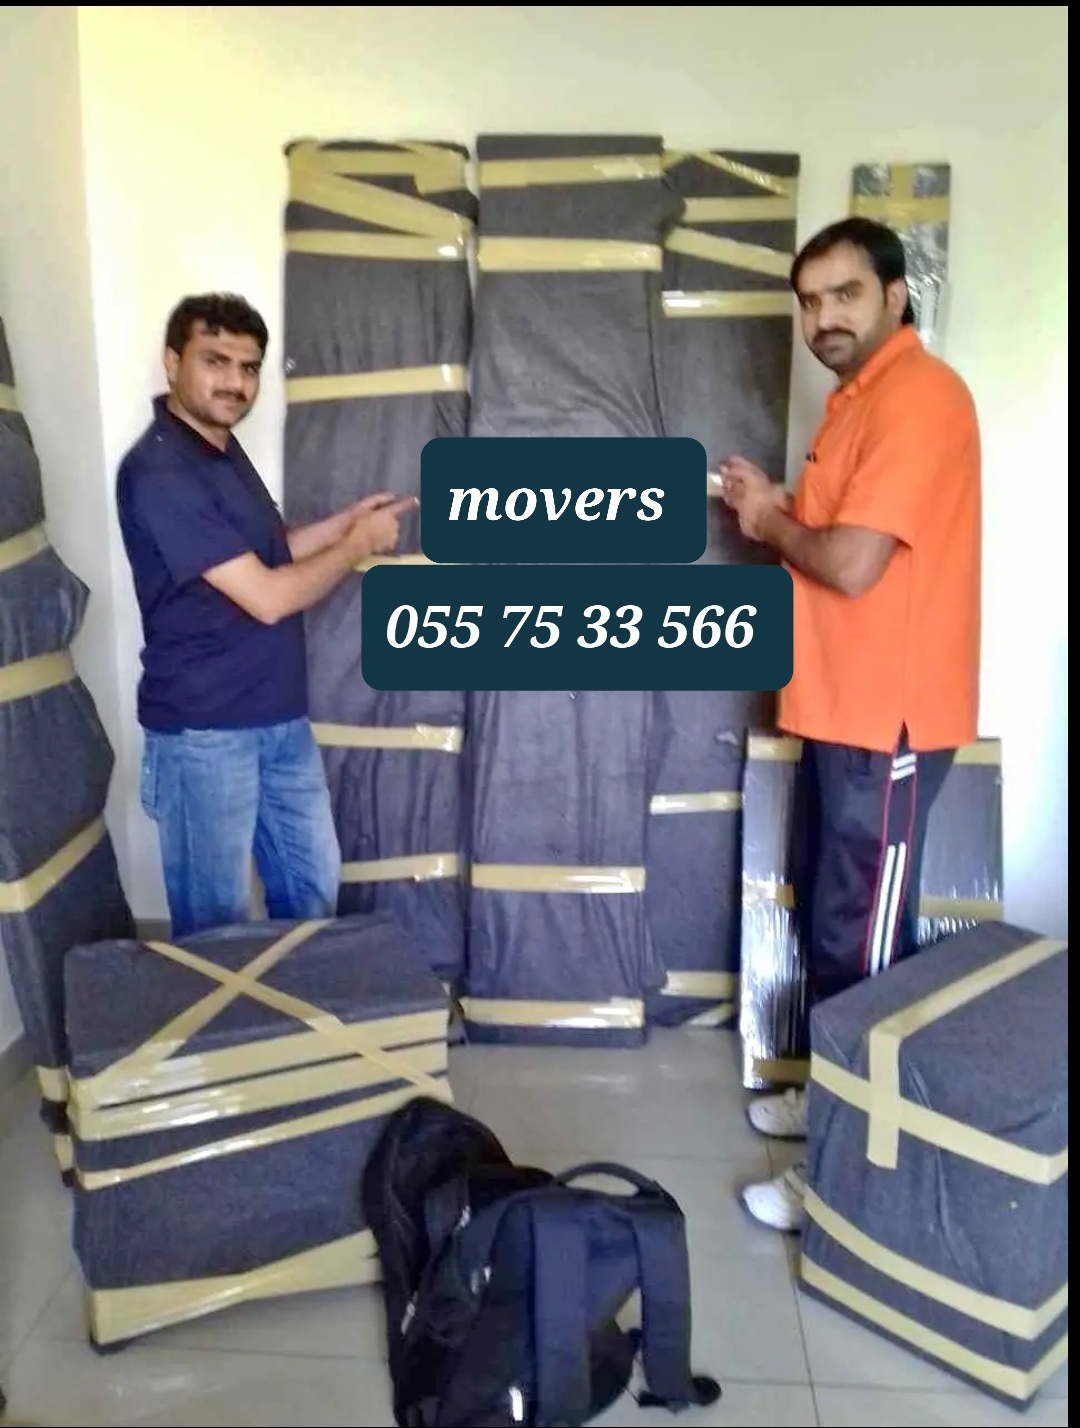 MOVERS AND PACKERS IN DUBAI 055 75 33 566